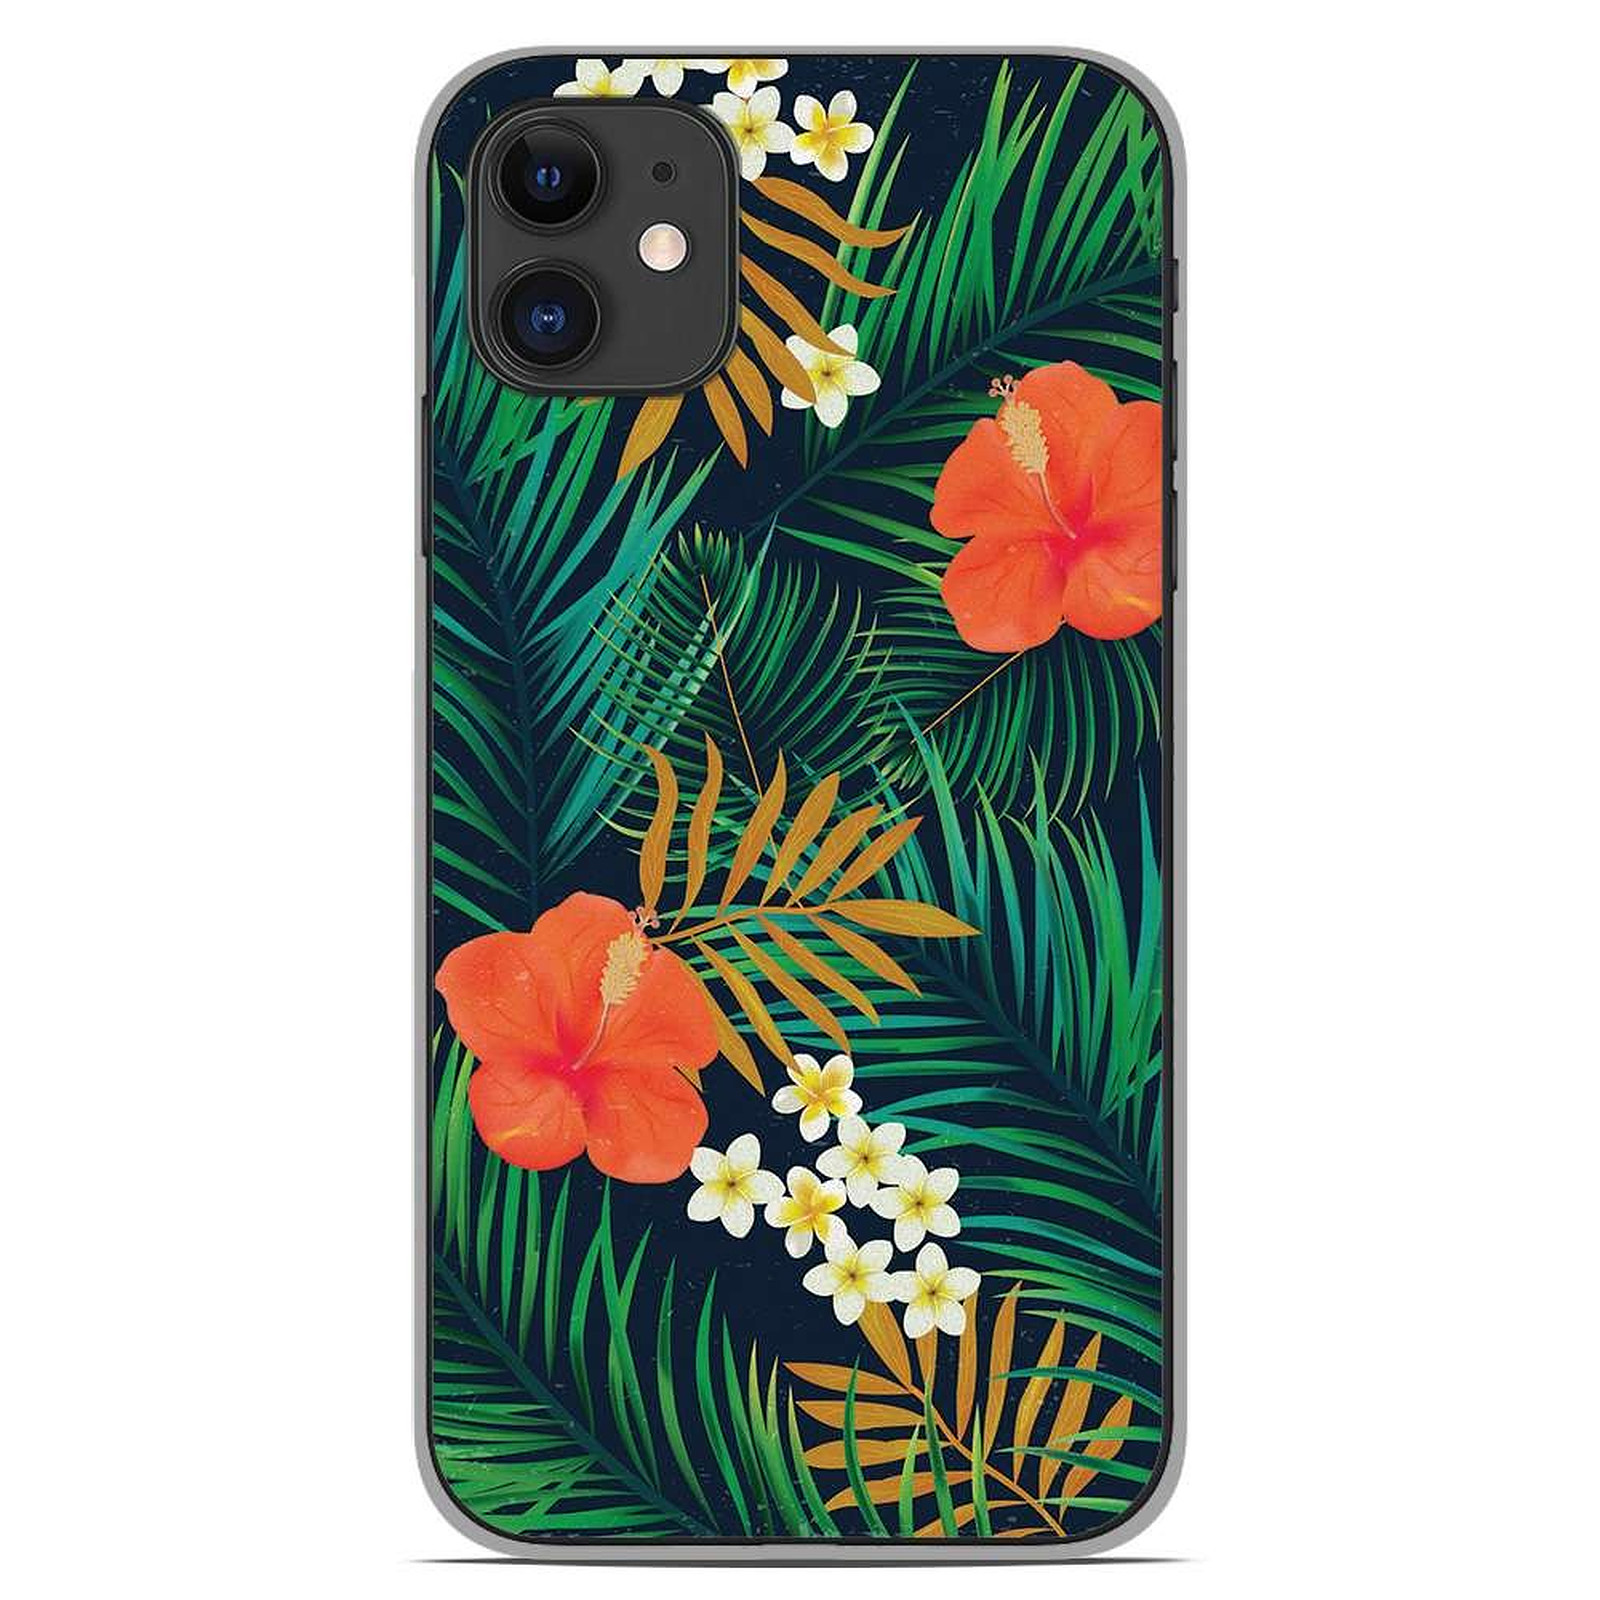 1001 Coques Coque silicone gel Apple iPhone 11 motif Tropical - Coque telephone 1001Coques